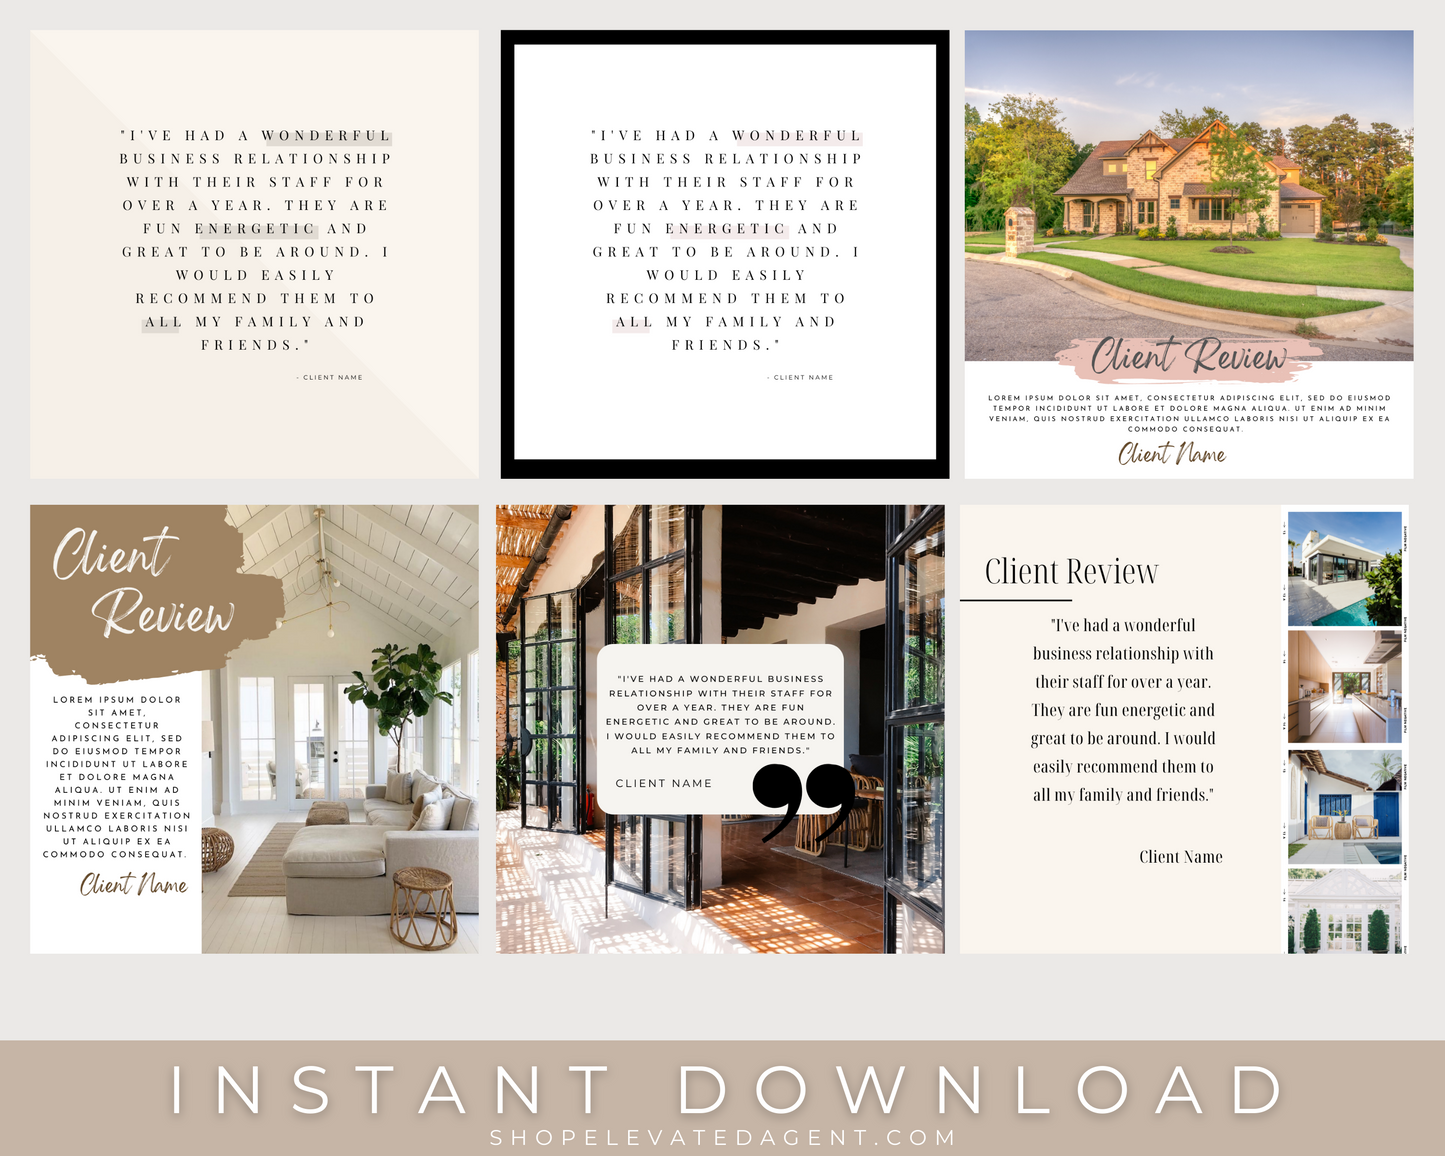 Six Template Examples of Social Media Marketing Template for Realtors to post Reviews and Client Testimony, Real Estate Marketing, Instant Download. Real Estate Template – 20 Real Estate Testimony Posts